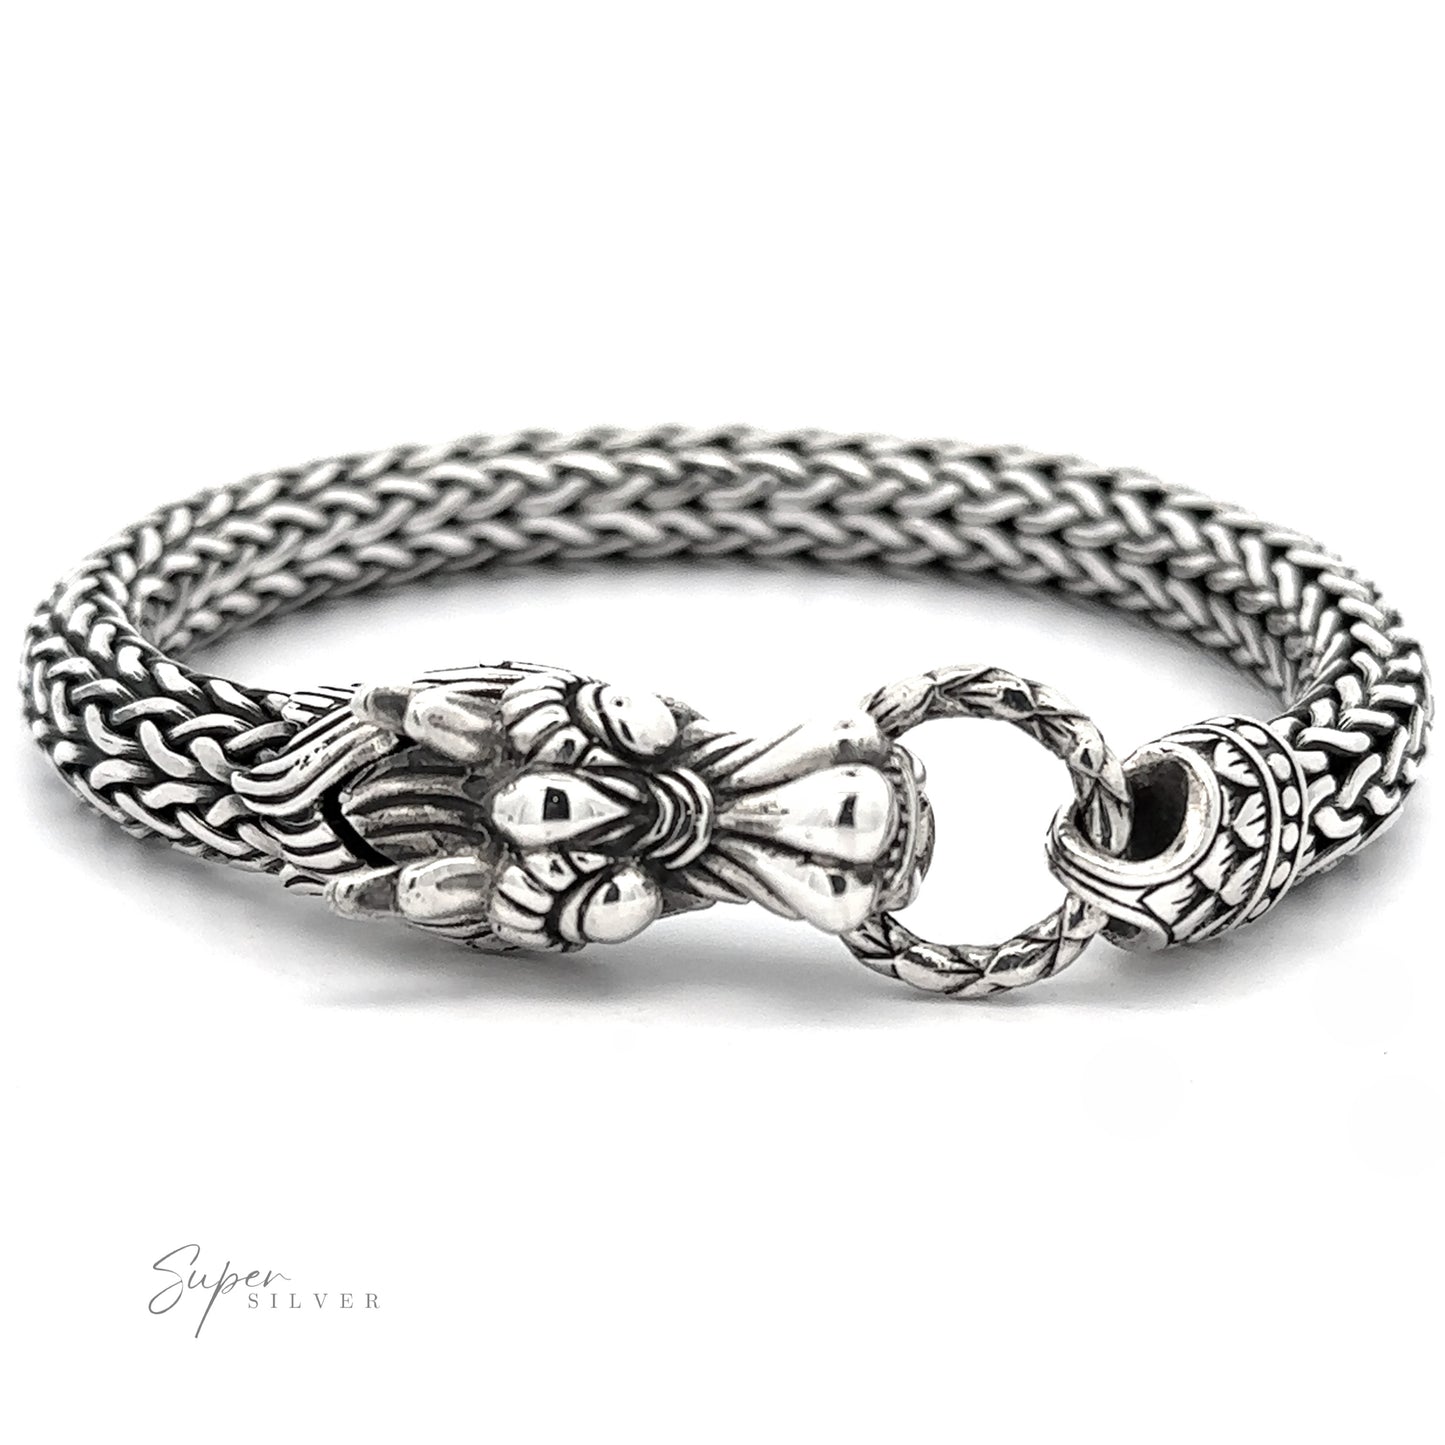 
                  
                    Sterling Silver Braided Rope Bracelet with Dragon Head with an intricate woven chain design and ornate clasp featuring bold dragon-like details. The sterling silver clasp ring connects to a decorative end piece, making a bold statement. Branding at bottom left corner.
                  
                